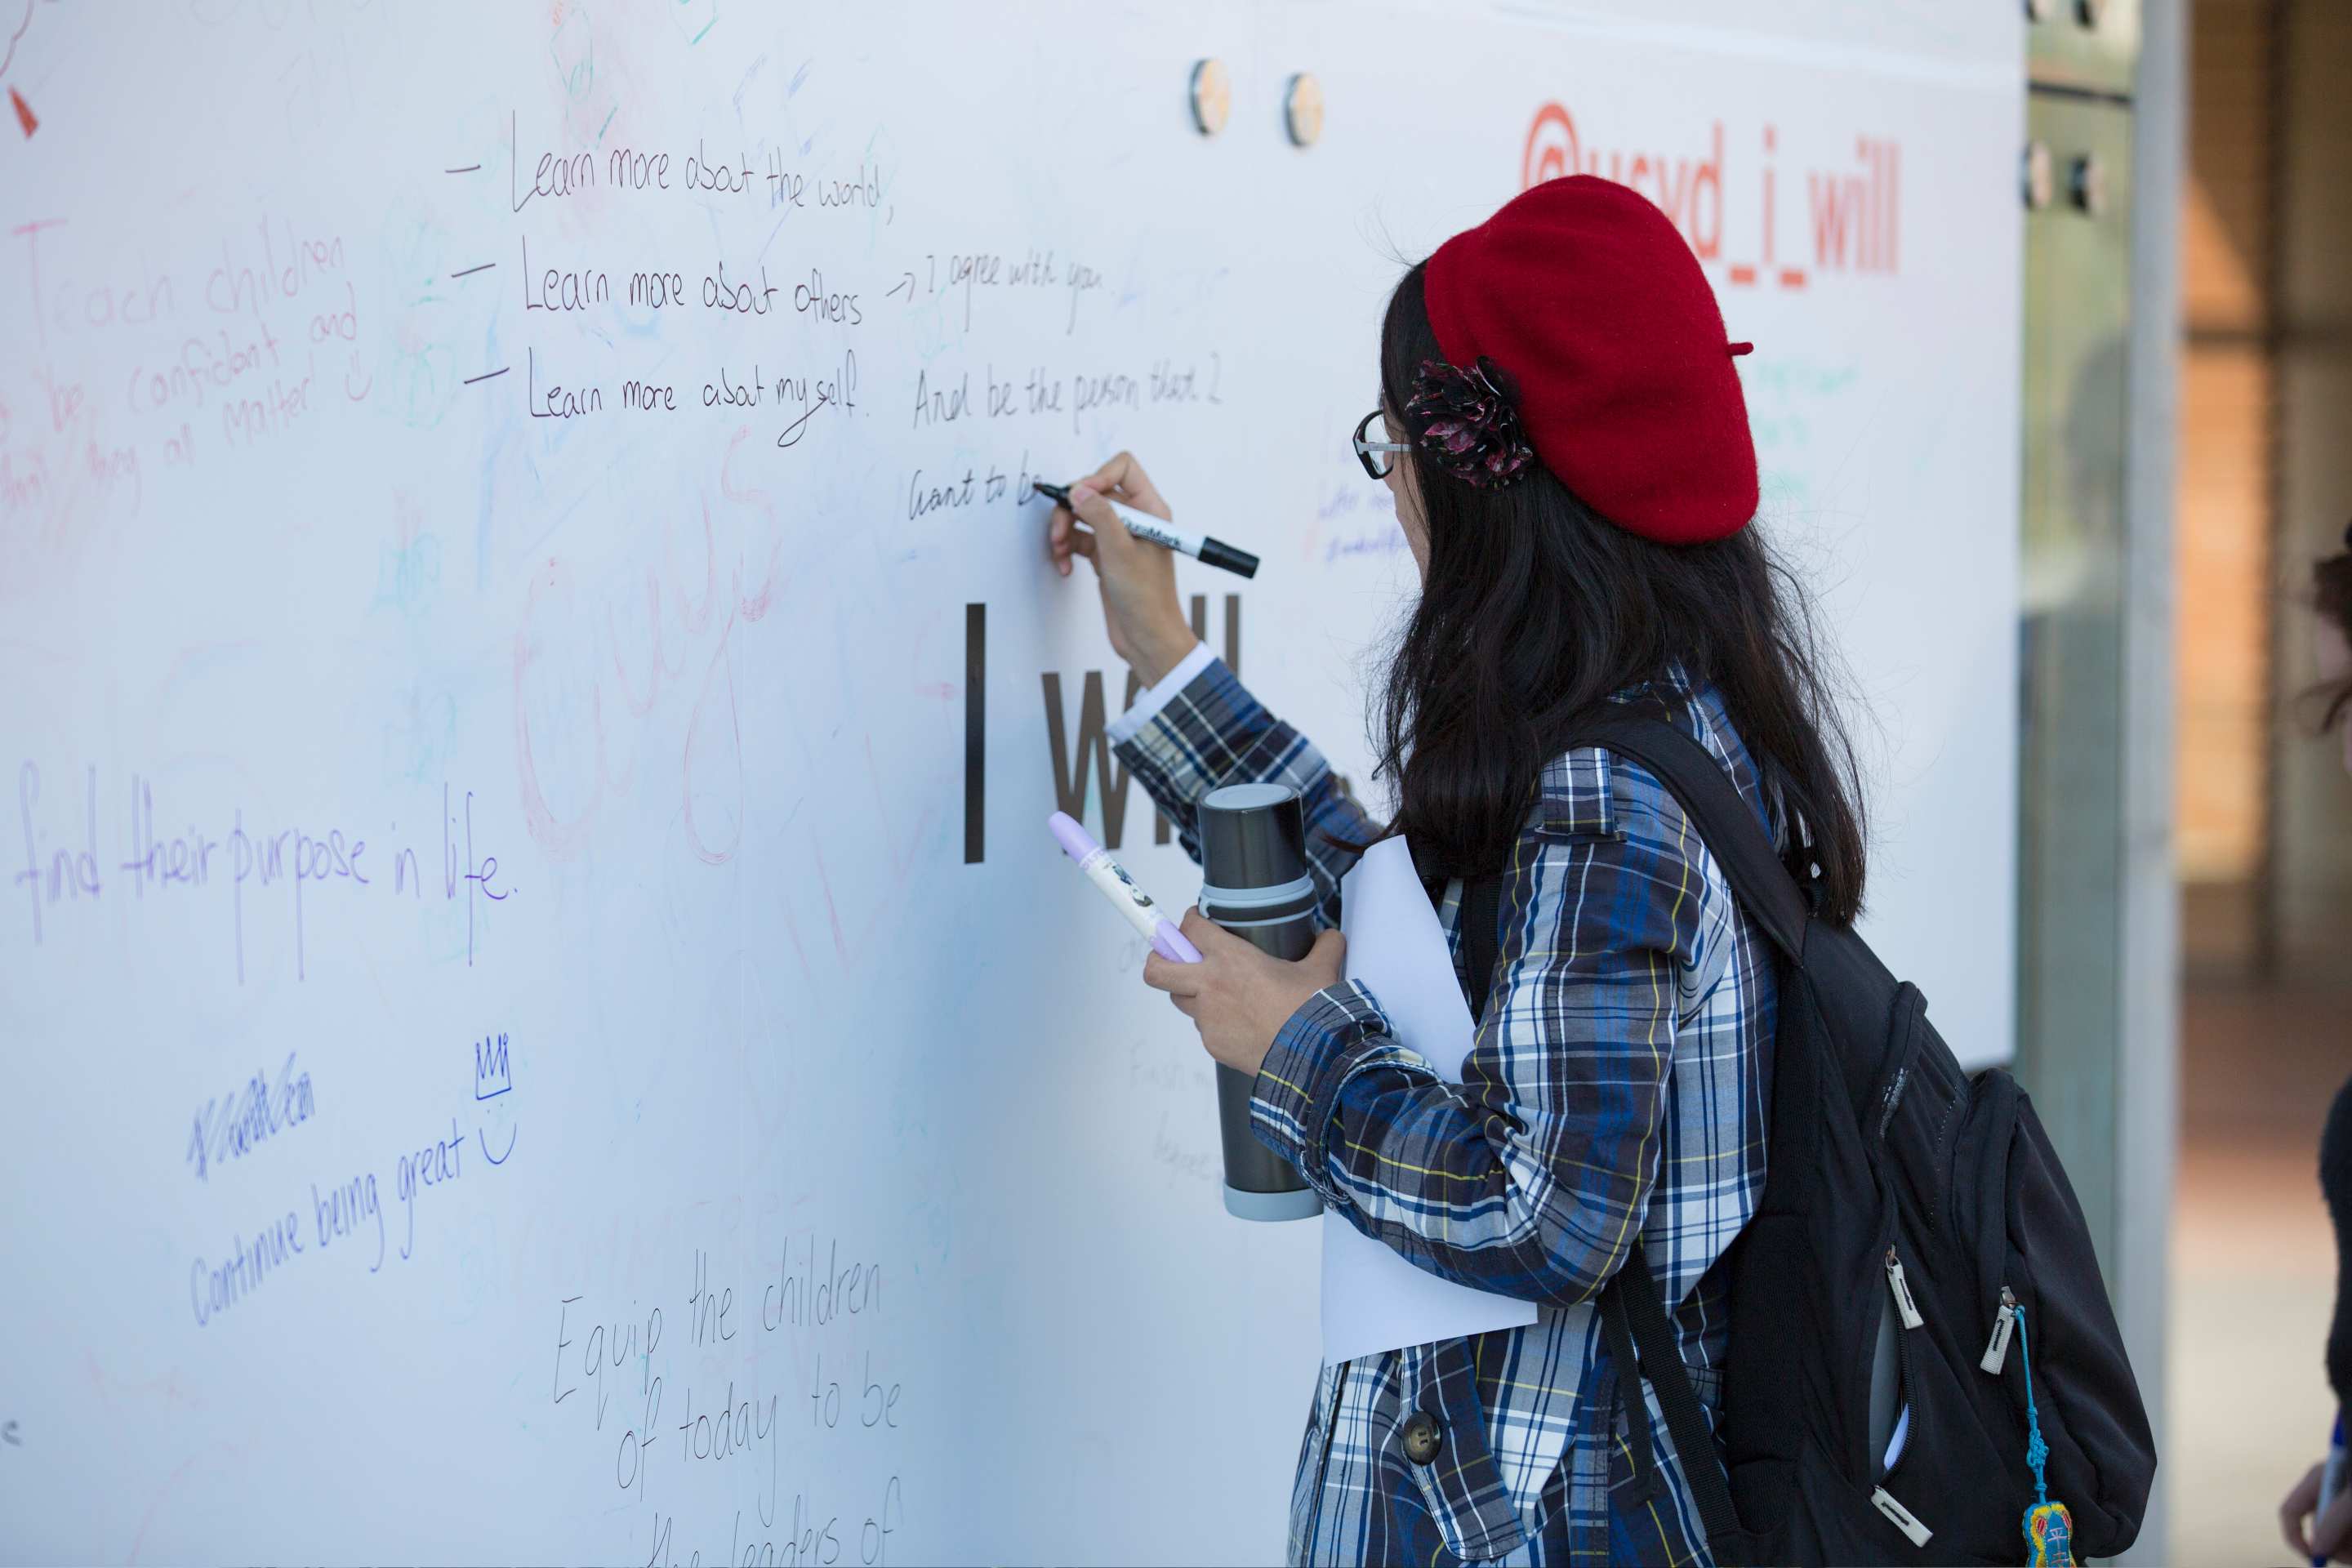 Girl at I will message wall during brand campiagn